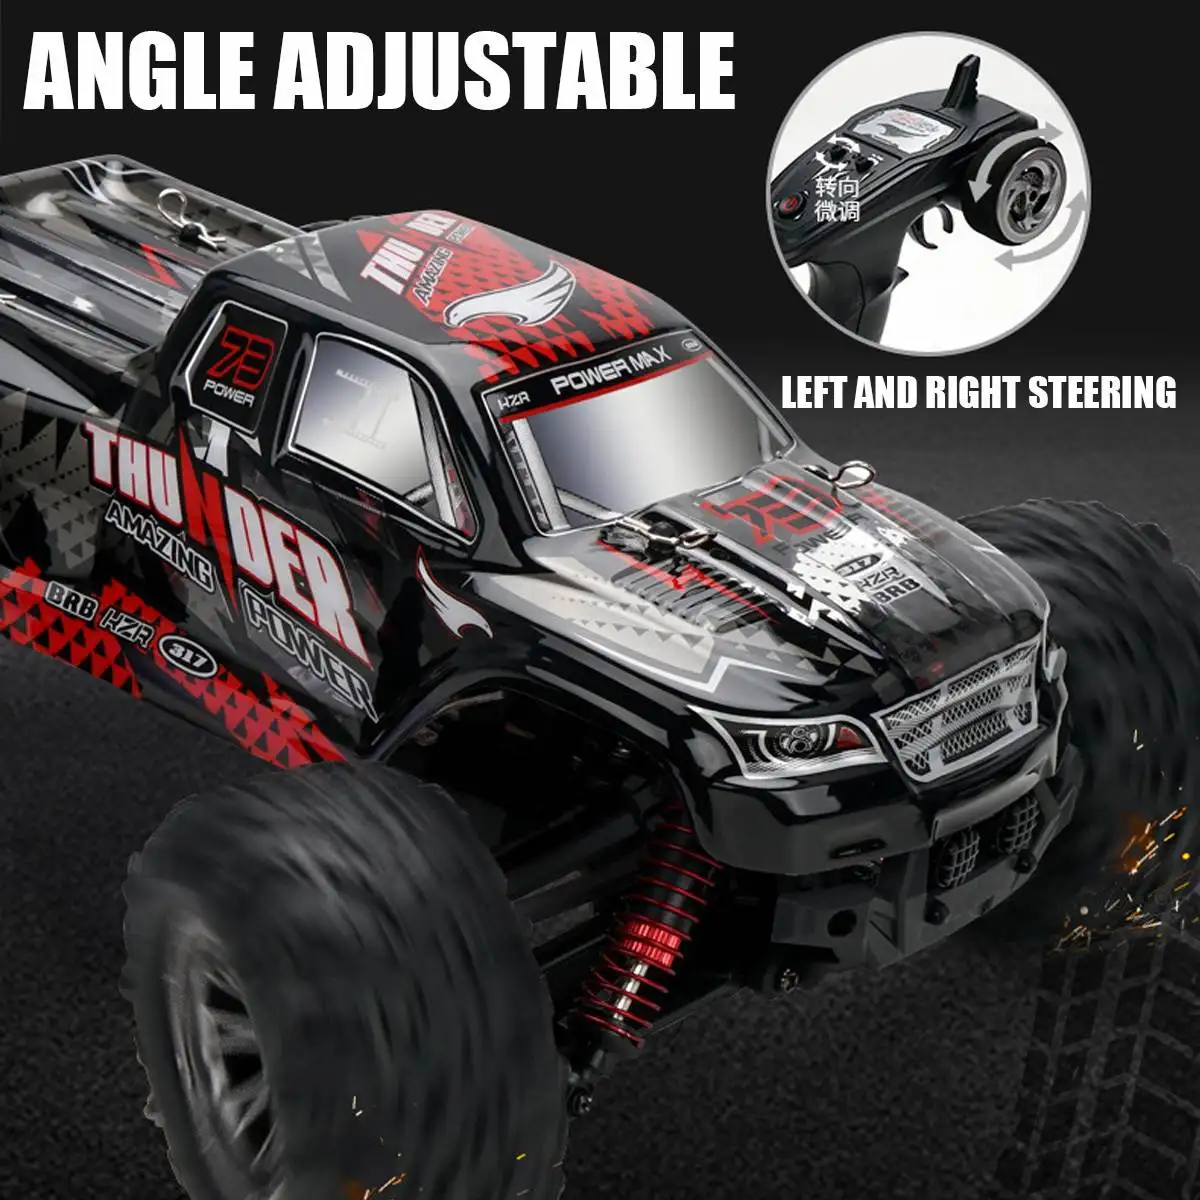 RC Car 36KM/H High Speed Racing Remote Control off-road Car for Adults 4WD Monster Truck Climbing Vehicle Christmas Gift enlarge